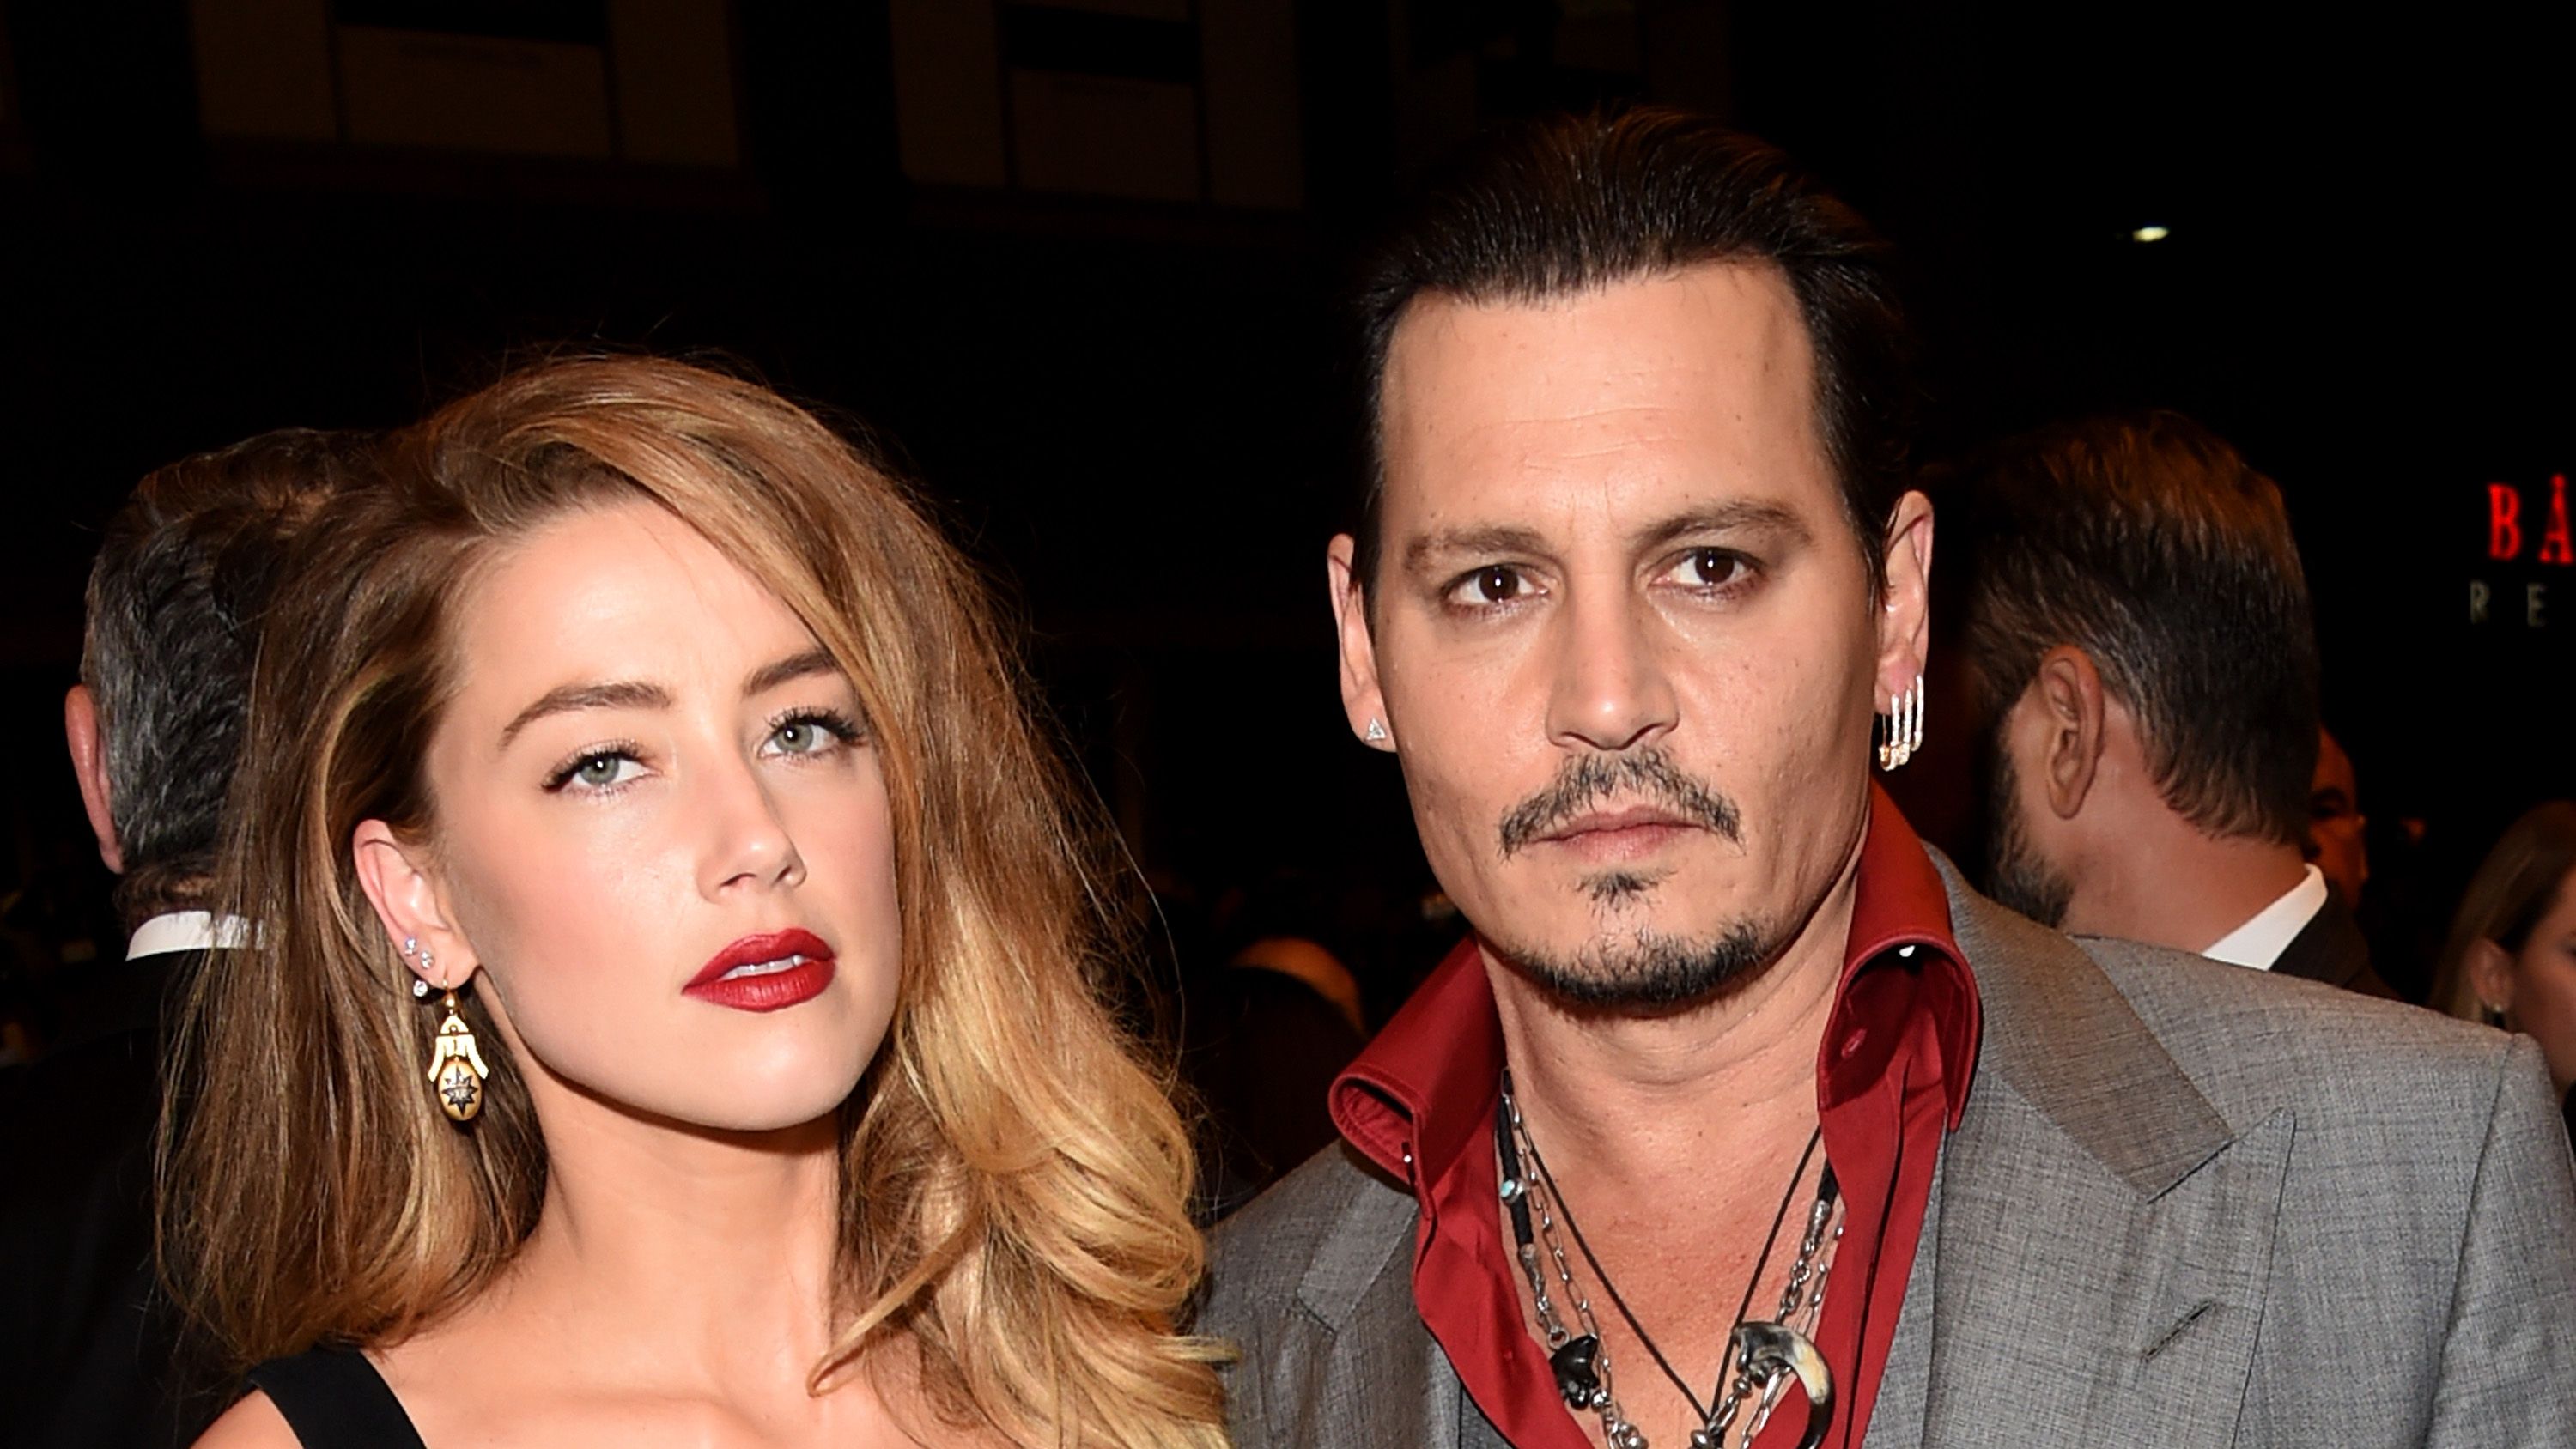 Amber Heard Sex Porn Captions - Amber Heard, Johnny Depp Cheating Accusations During Libel Trial